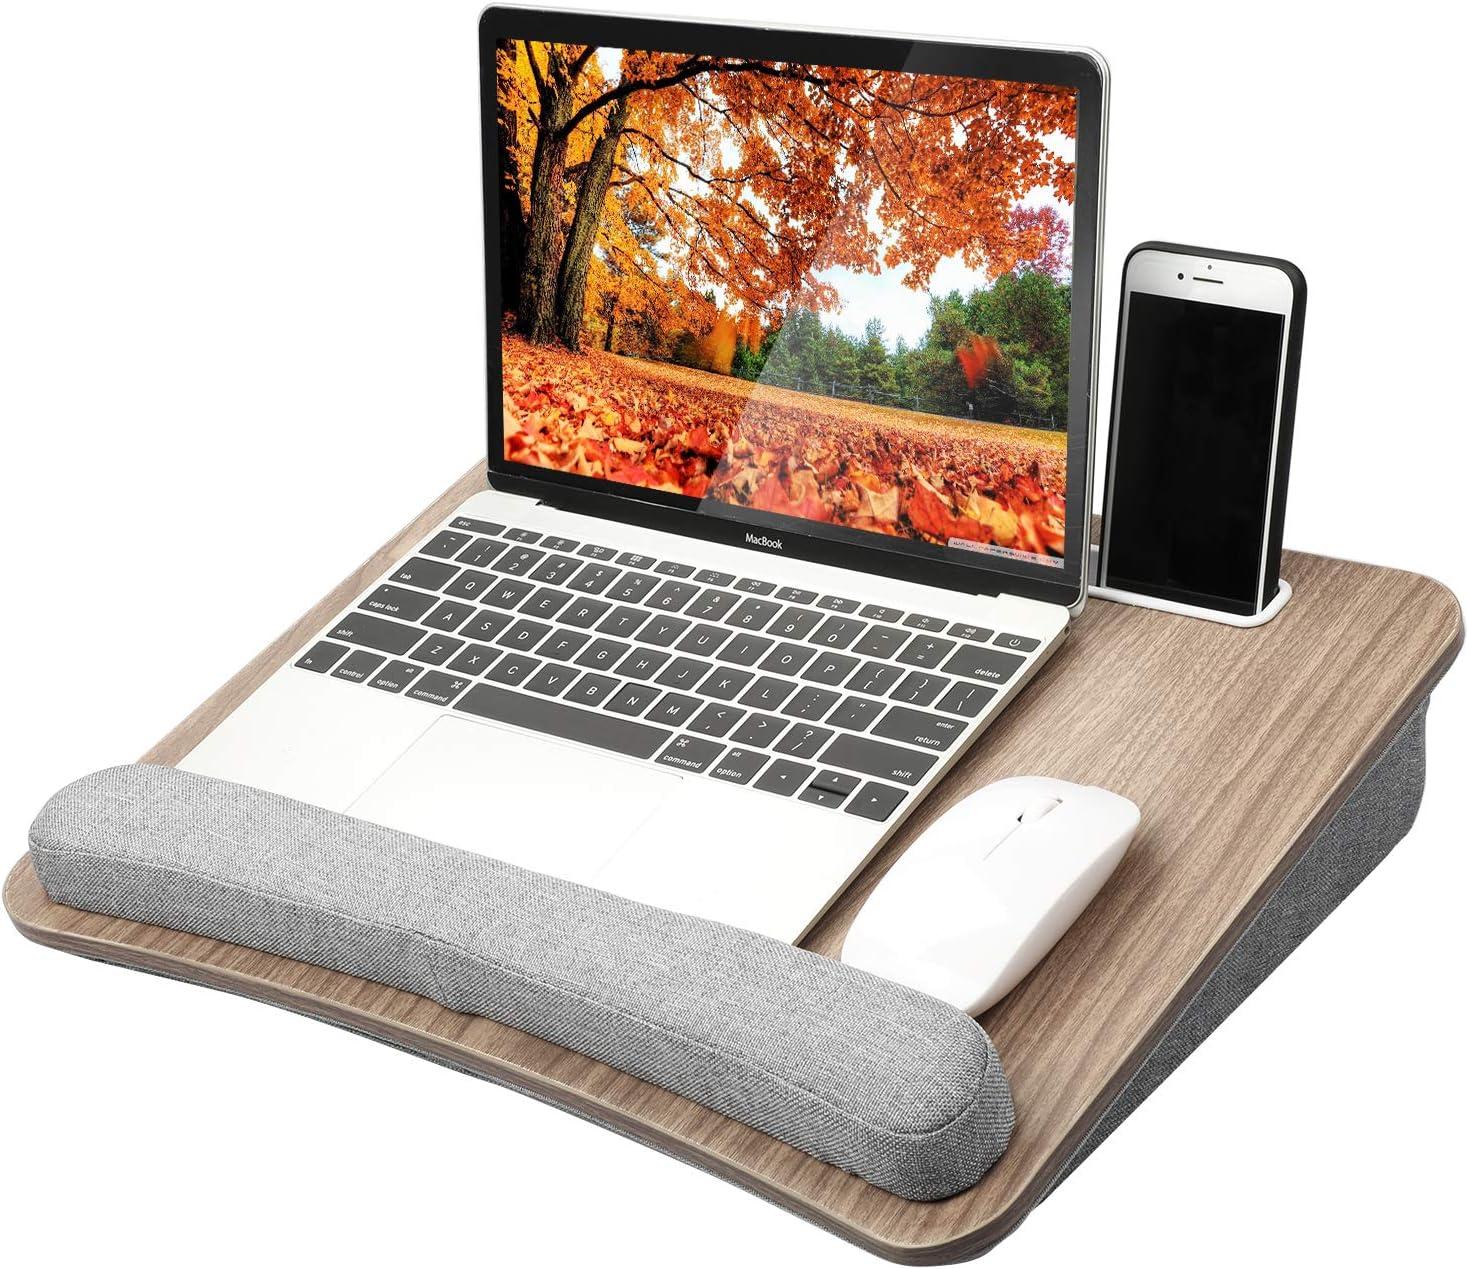 Portable Lap Laptop Desk with Pillow Cushion for $11.99 Shipped